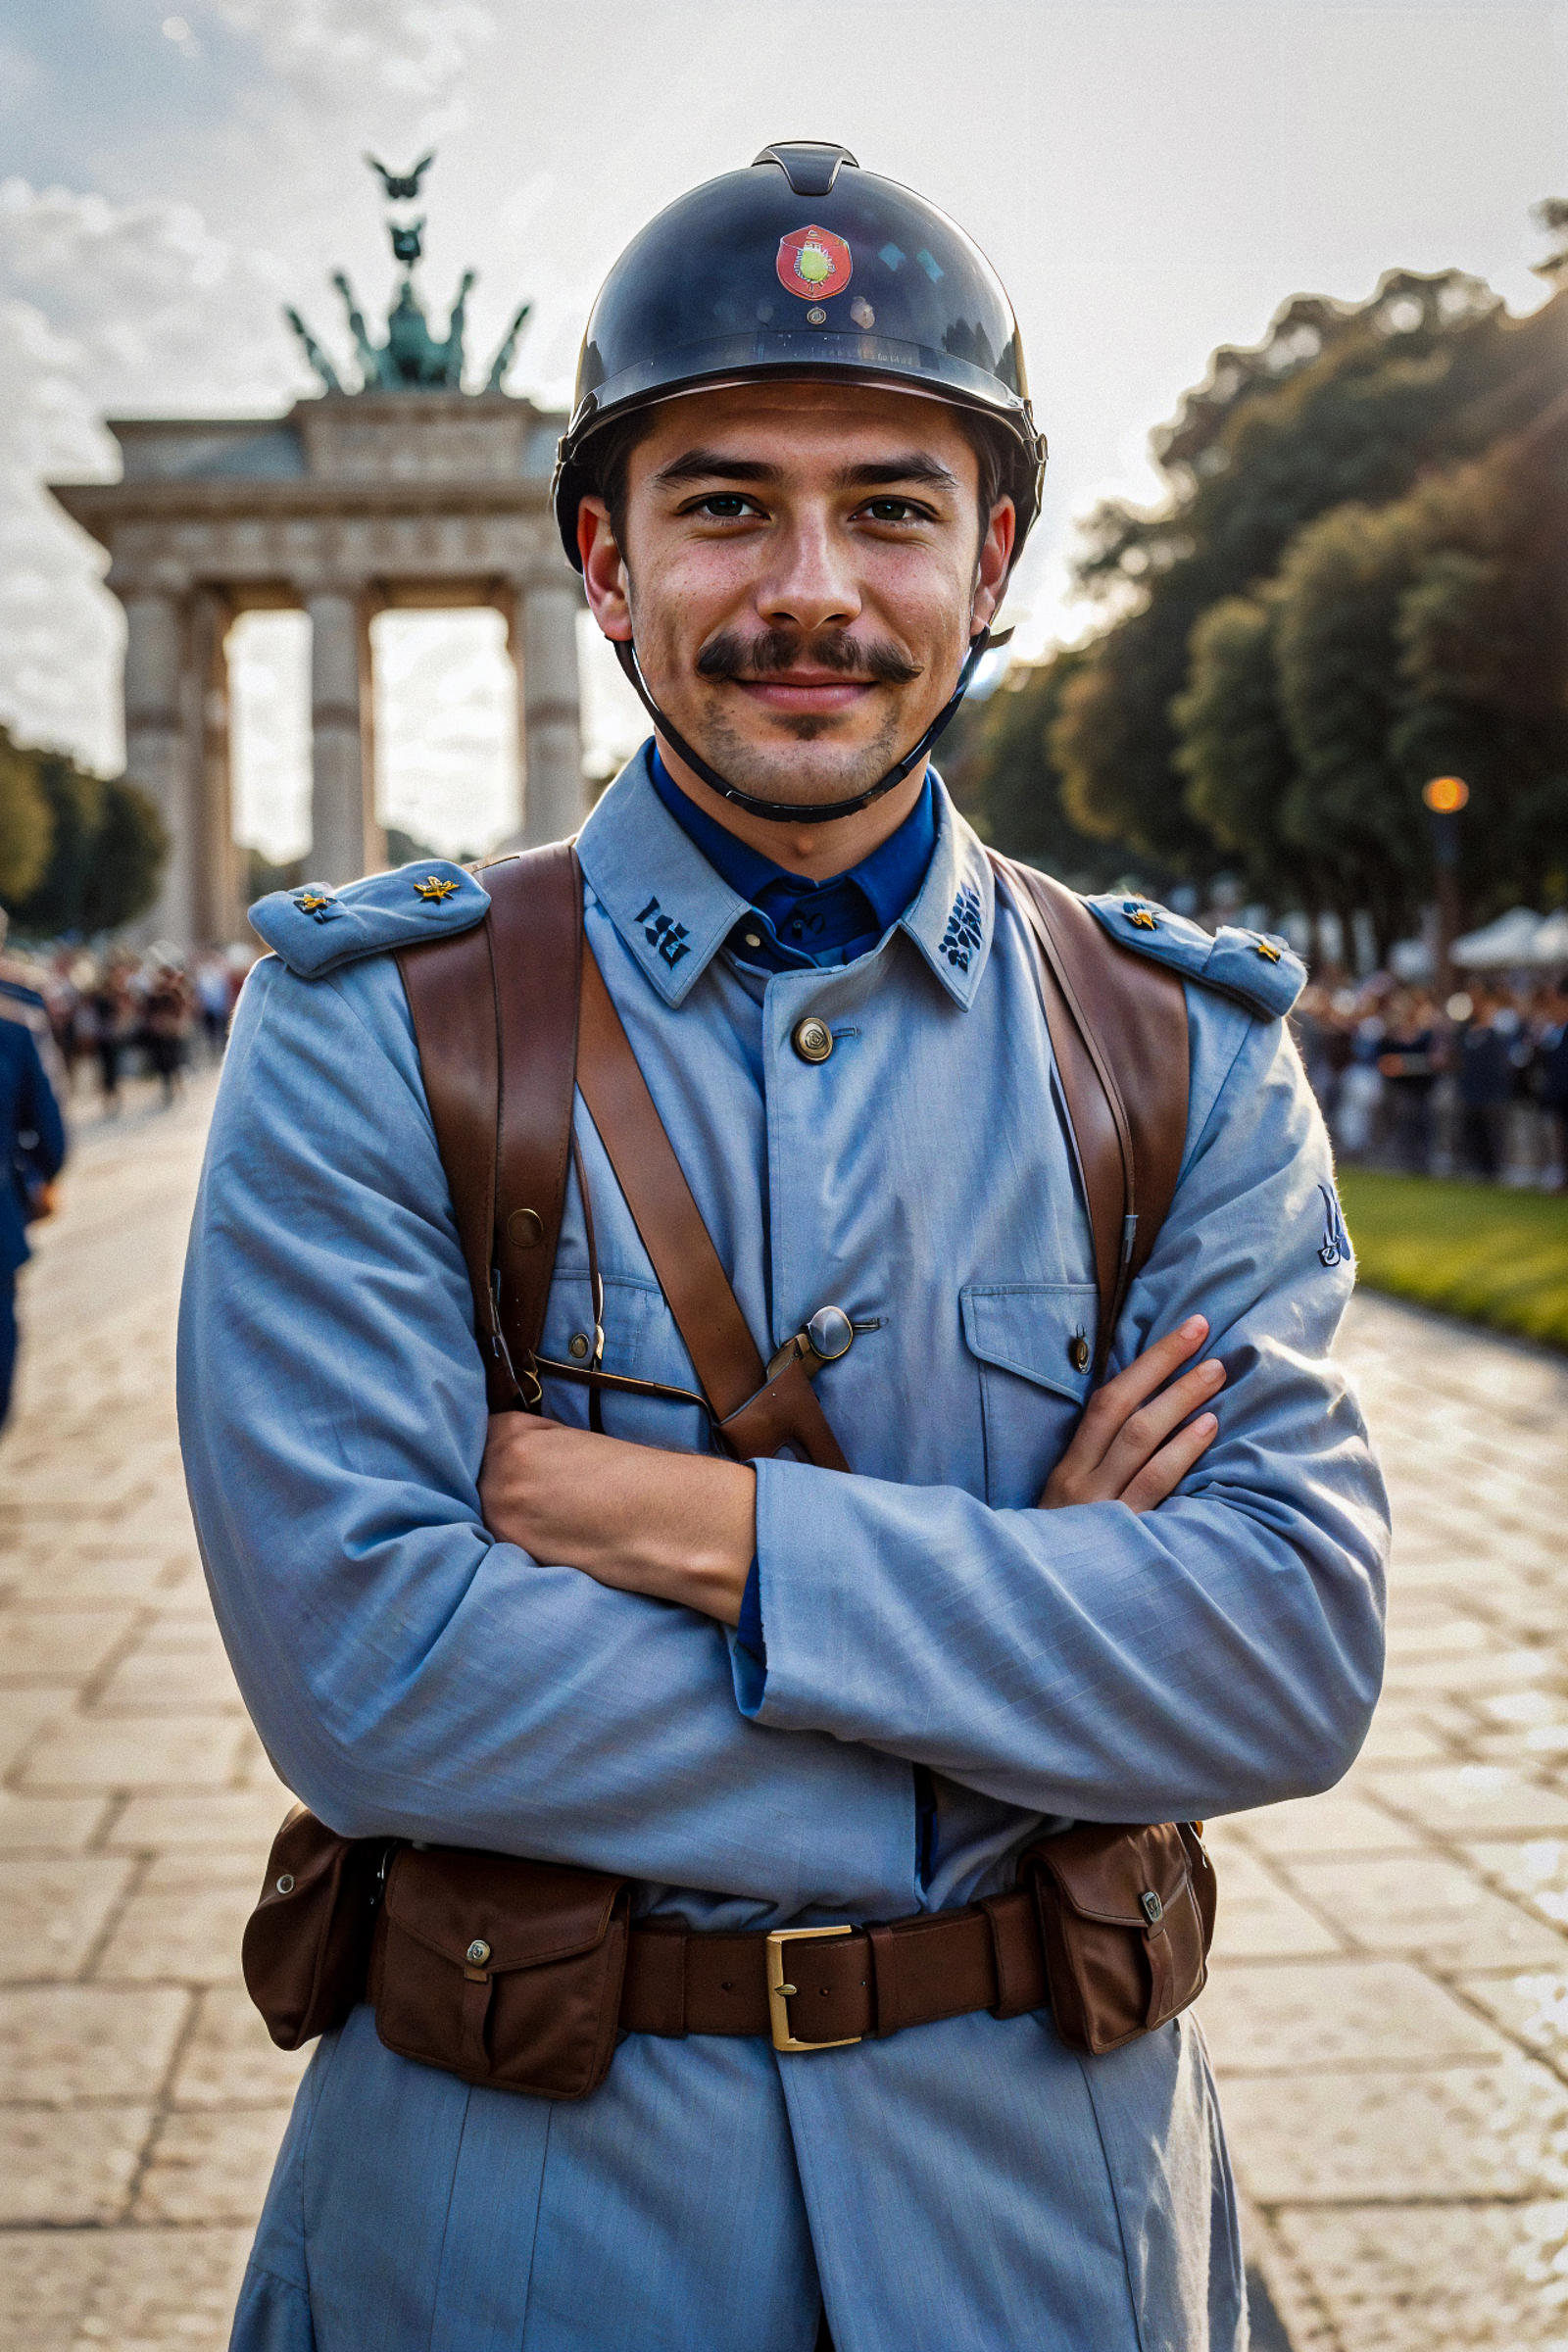 WW1 - French Soldier uniform image by Atomease